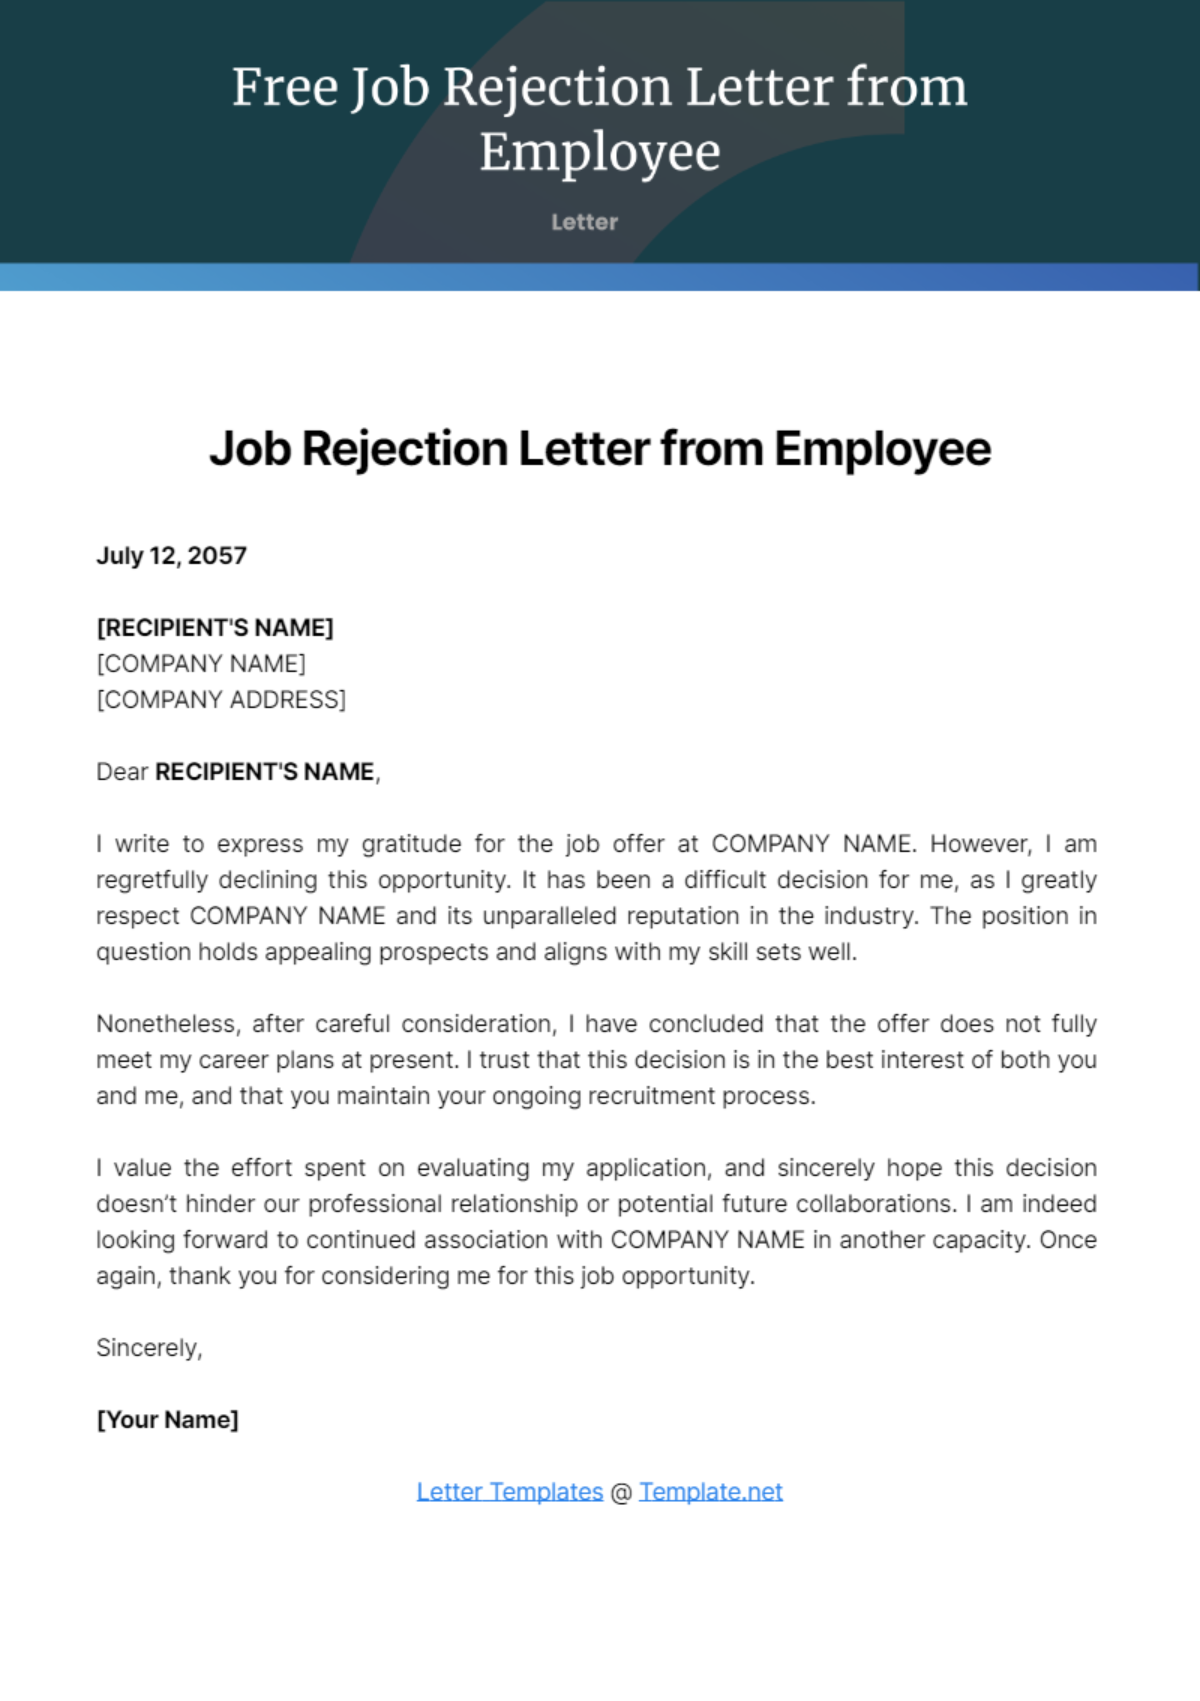 Job Rejection Letter from Employee Template